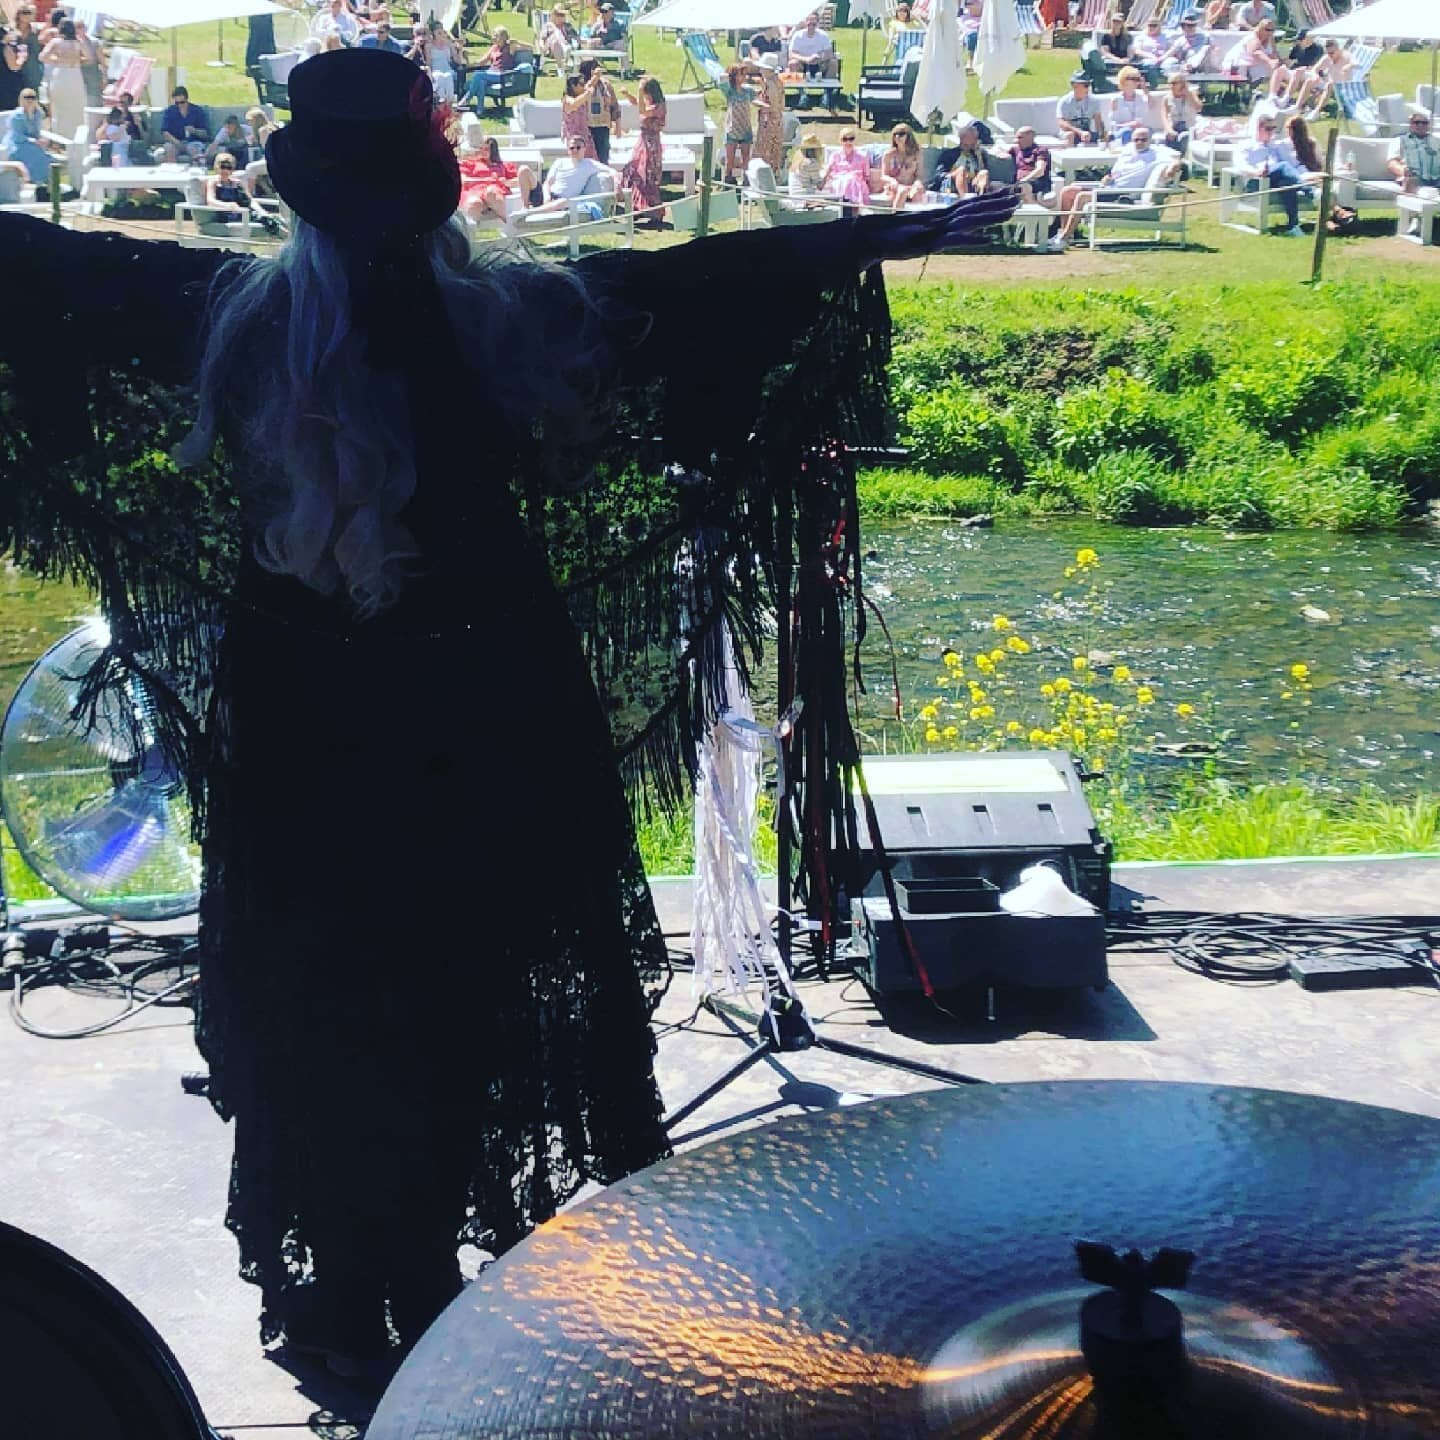 ...and we're Bac!! Wonderful to be on stage again. Fingers crossed for the 21st to be out fully gigging again!
#fleetwoodbac #fleetwoodmac #gisburneparkpopup #longlivelivemusic